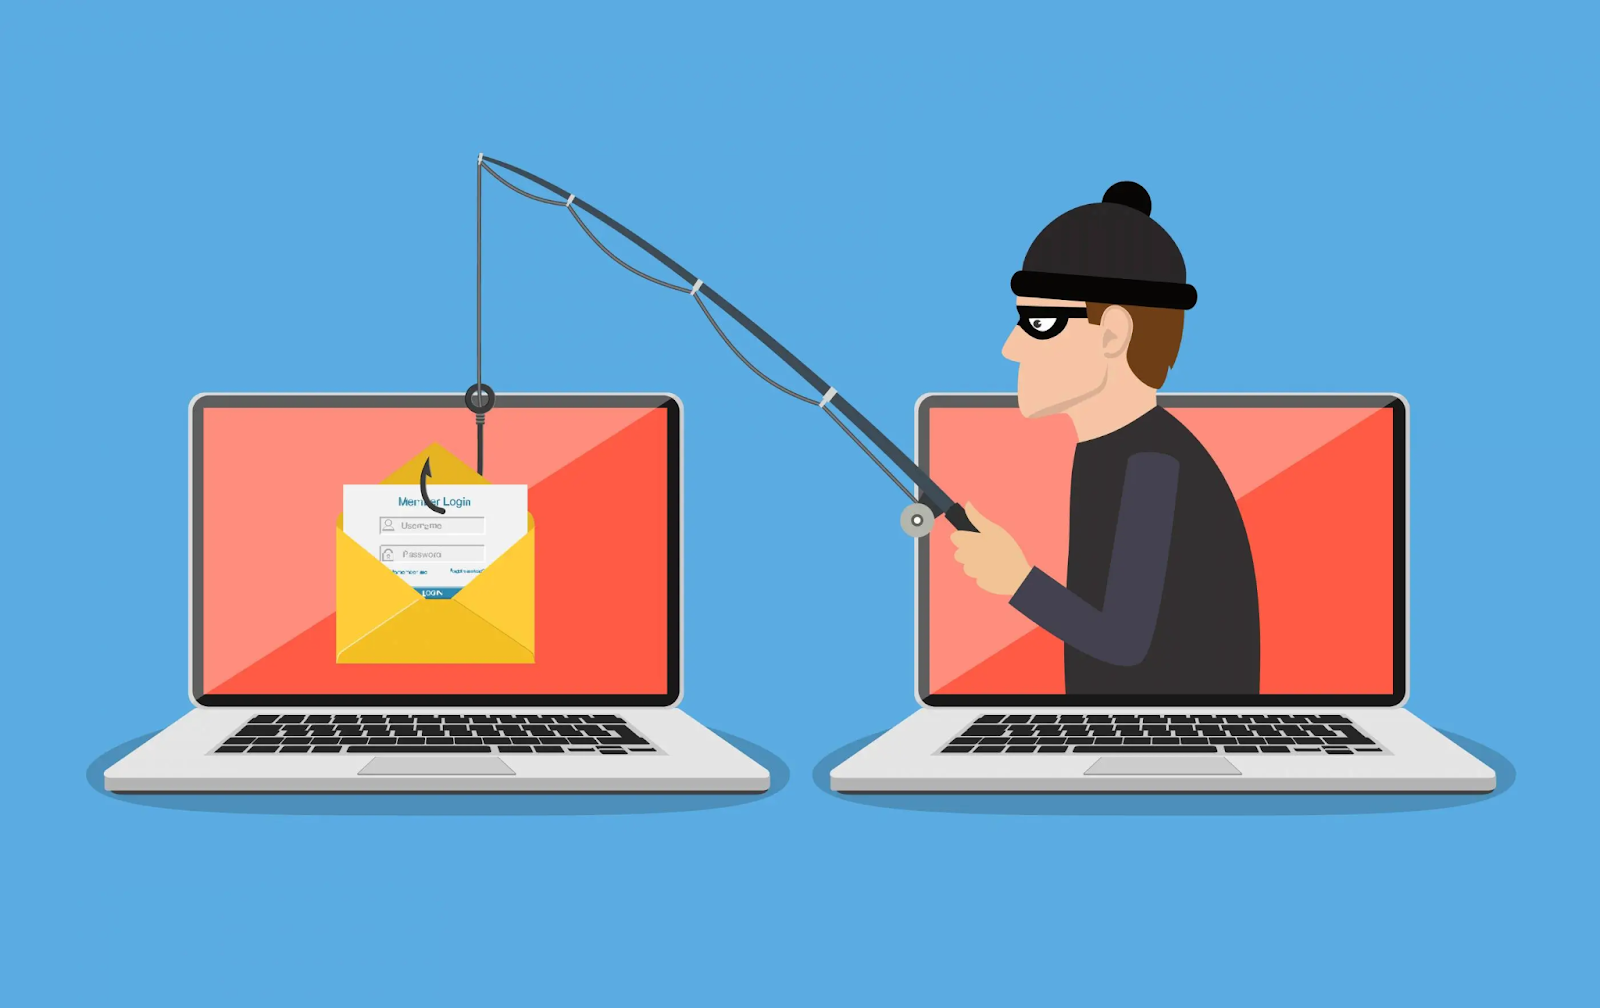 A masked man uses a fishing rod to catch an email.